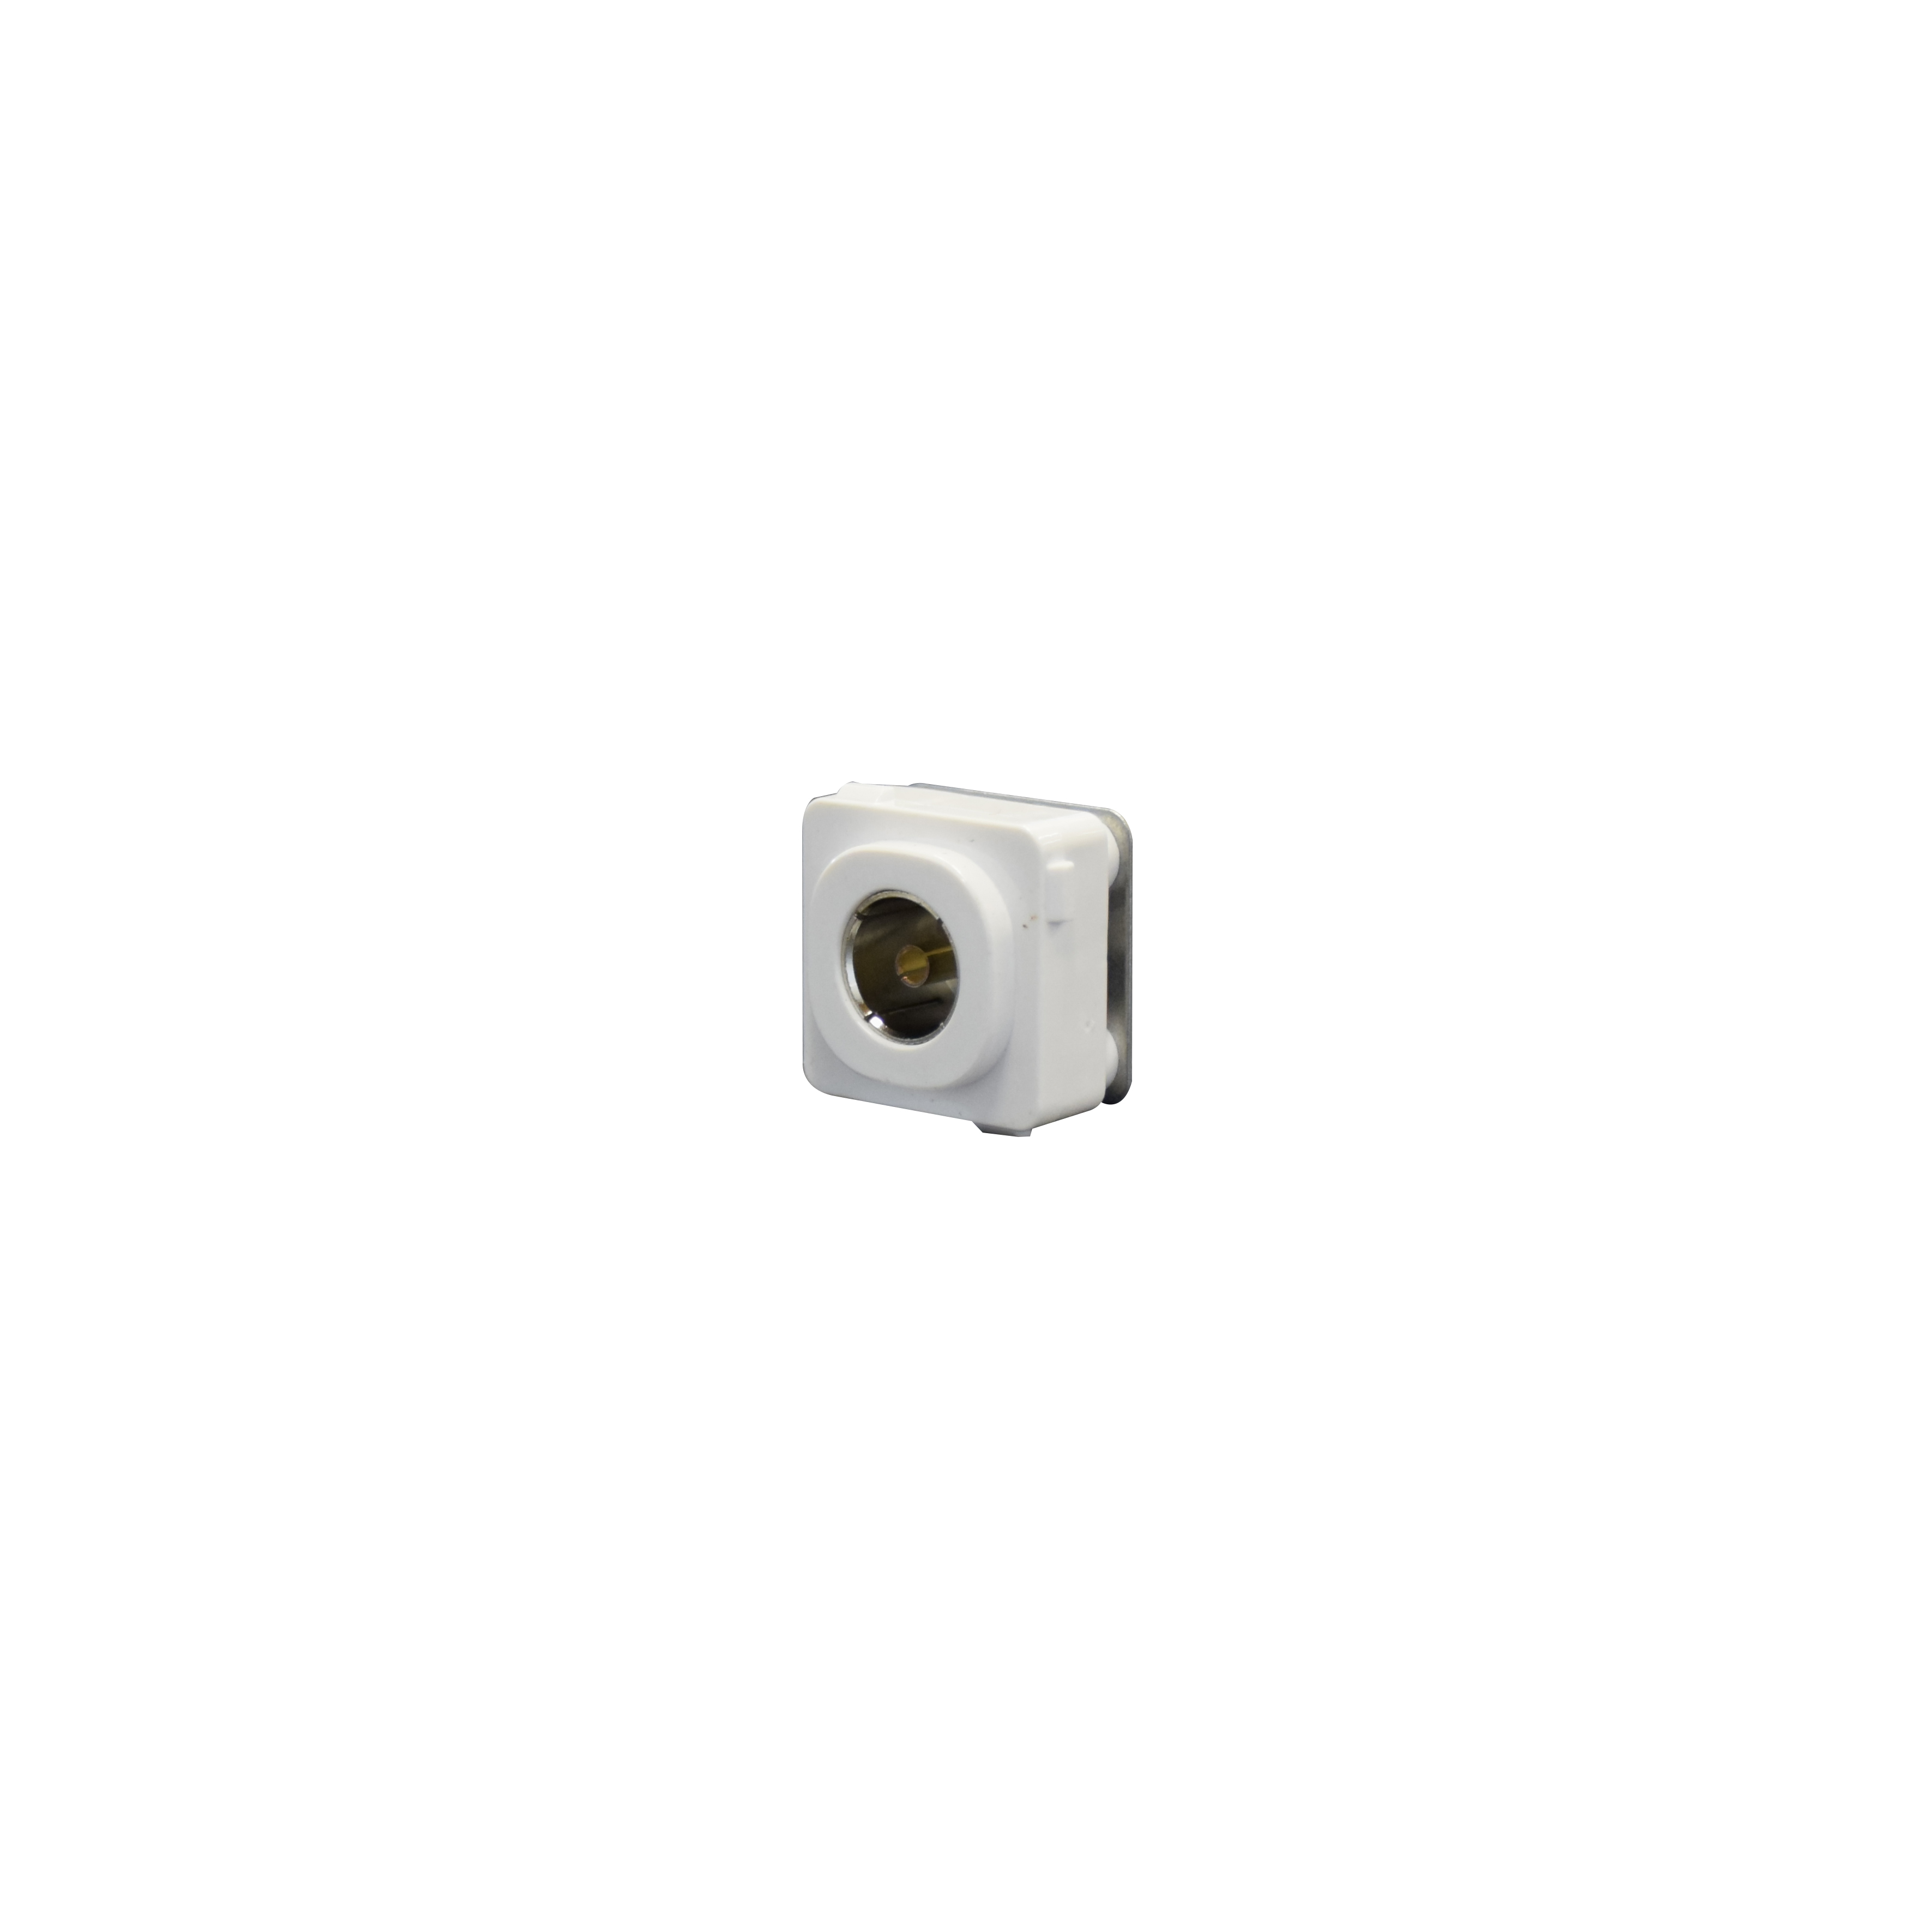 TV F to Coaxial 75 ohm Mechanism, White